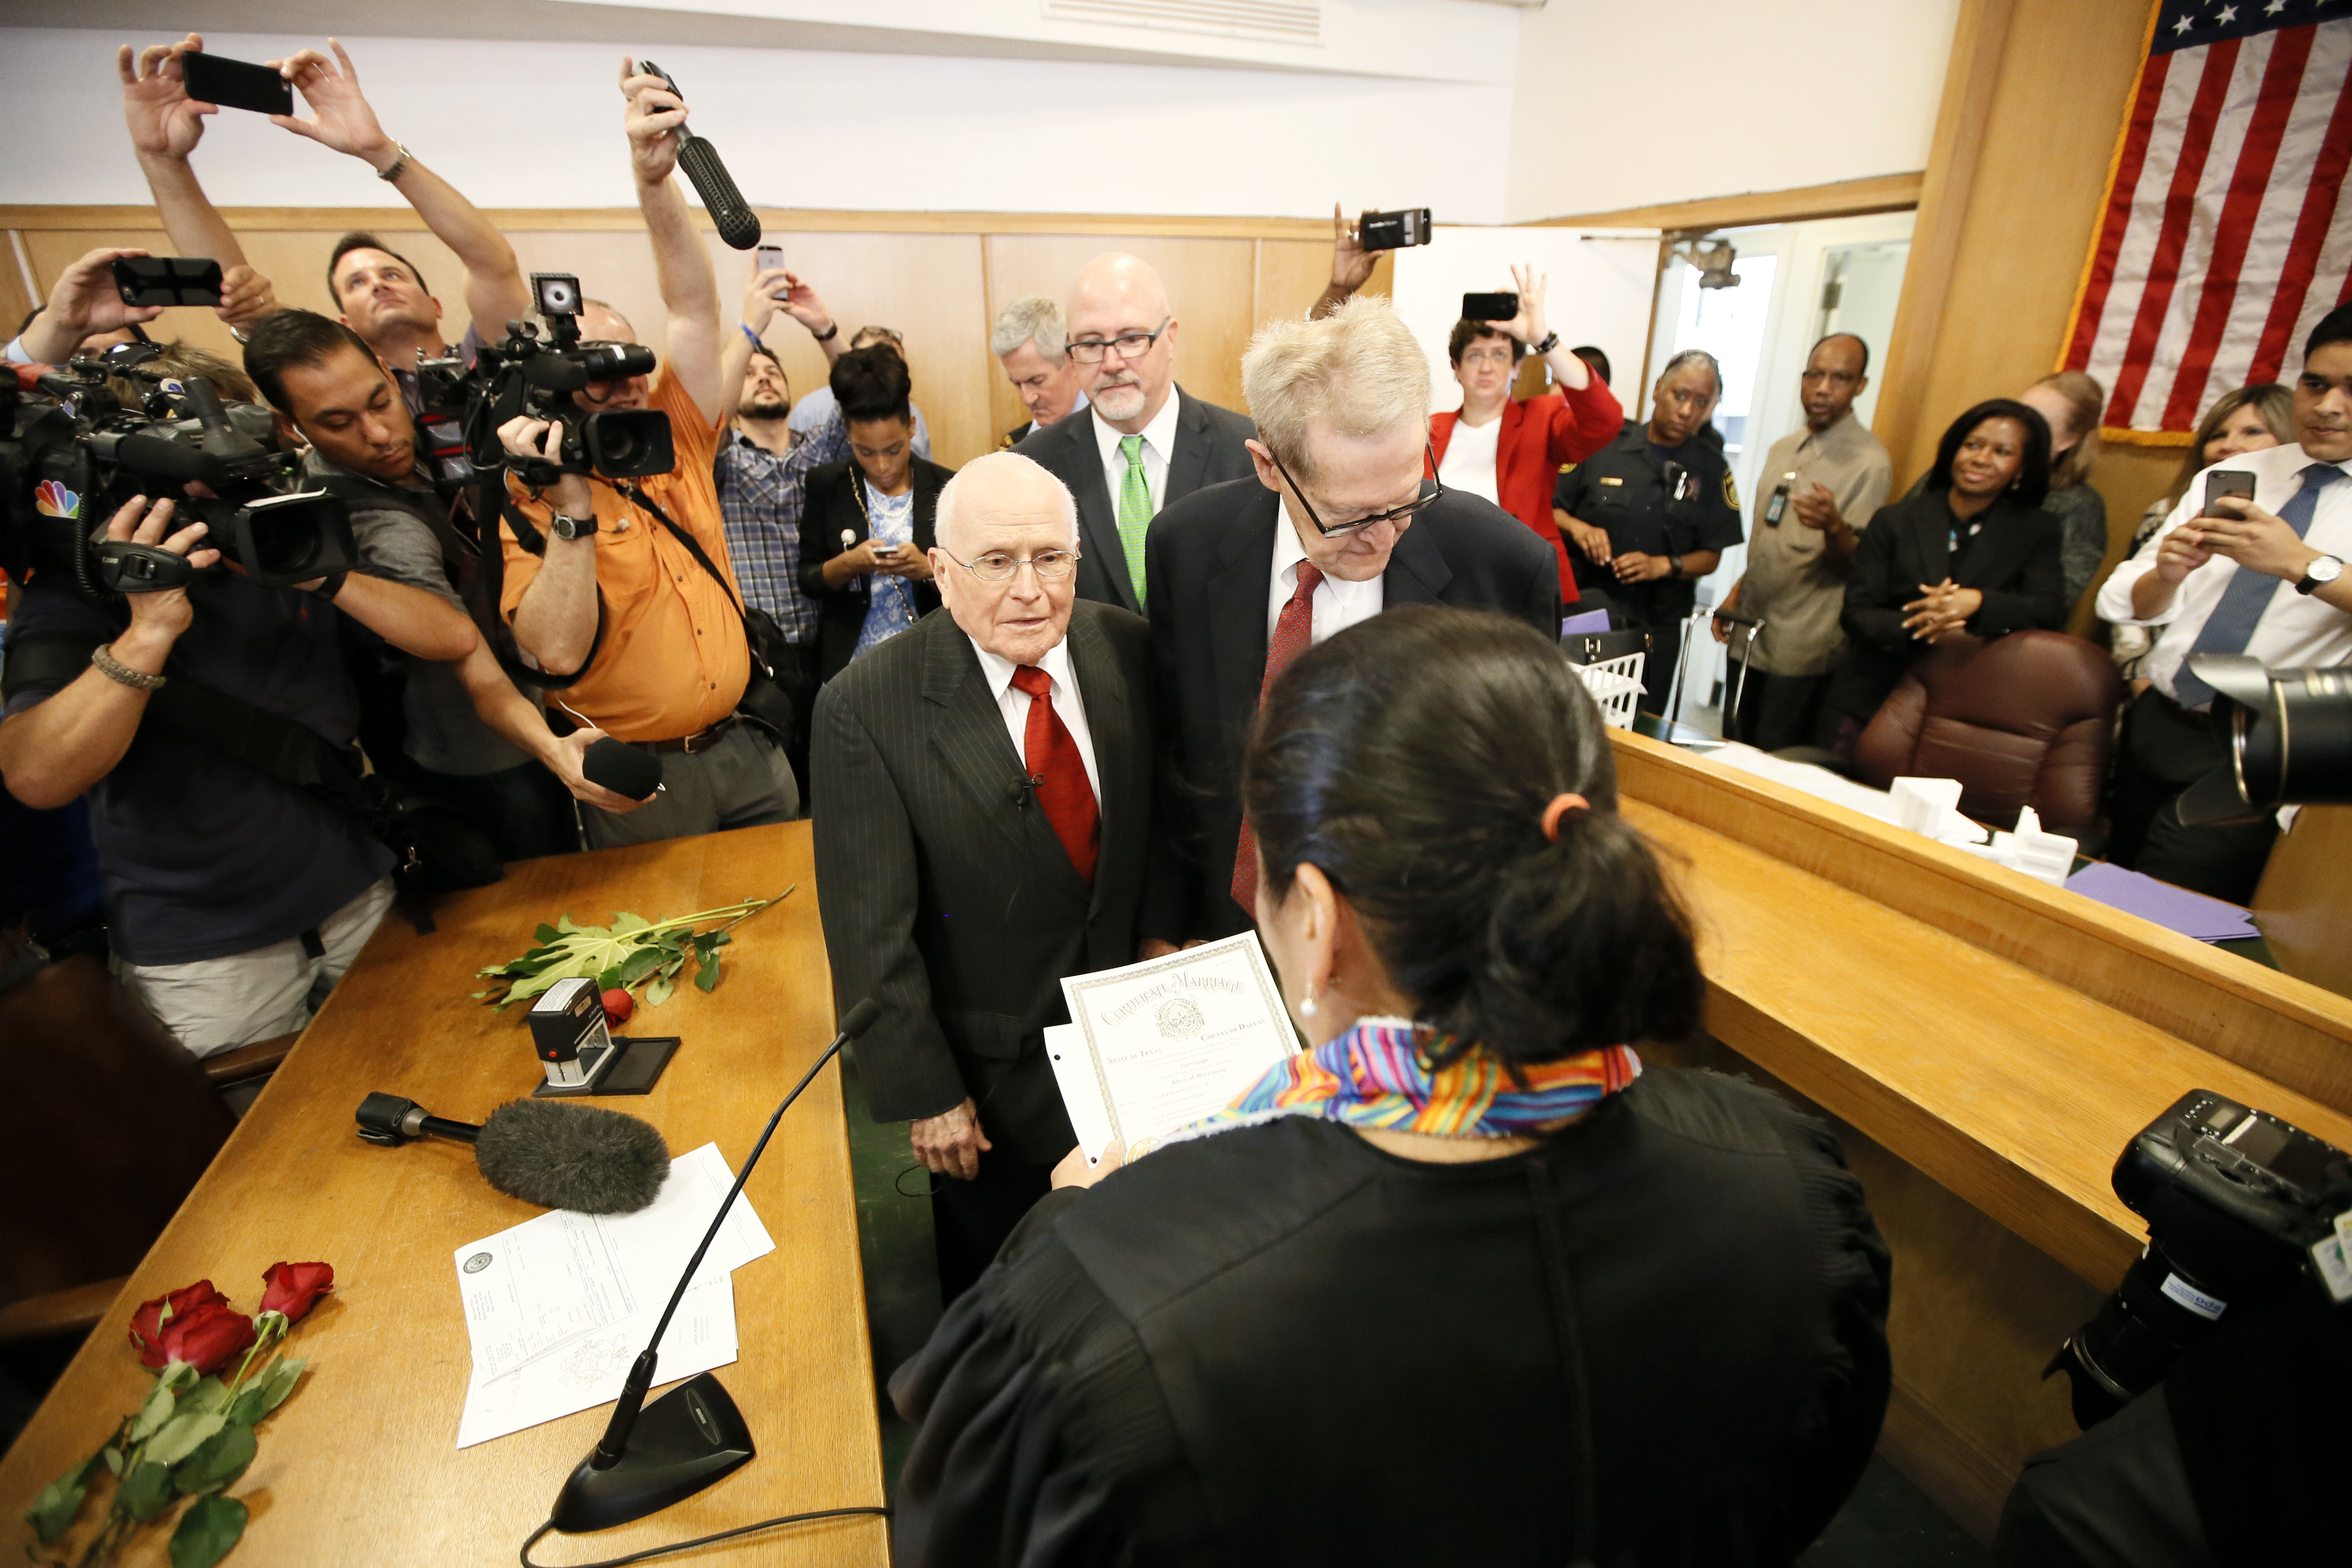 Judge Dennise Garcia, front, performs a marriage ceremony for George Harris, 82, center left, and Jack Evans, 85, center right, Friday, June 26, 2015, in Dallas. Gay and lesbian Americans have the same right to marry as any other couples, the Supreme Court declared Friday in a historic ruling deciding one of the nation's most contentious and emotional legal questions. Celebrations and joyful weddings quickly followed in states where they had been forbidden. (AP Photo/Tony Gutierrez)